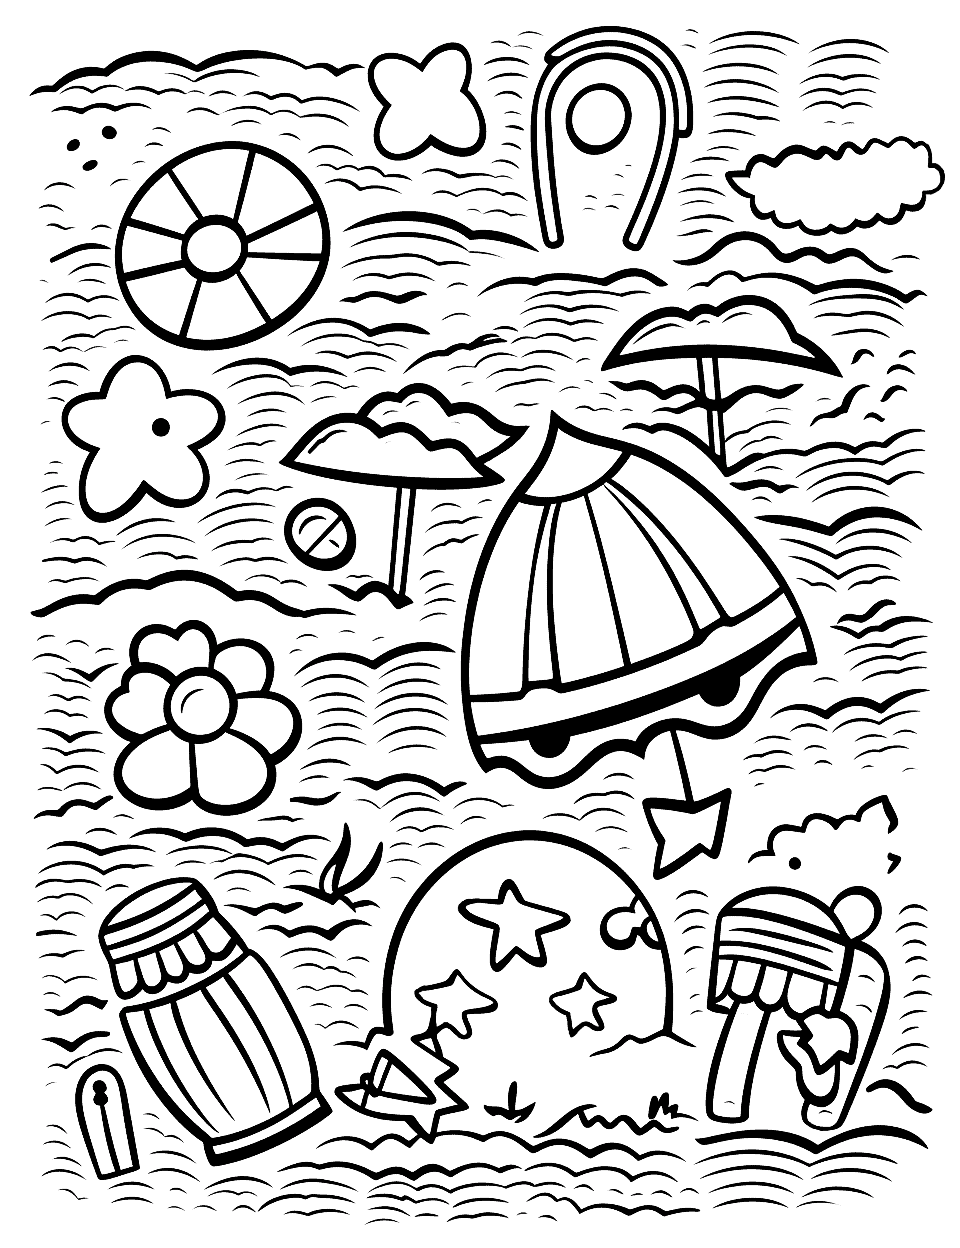 Summer Season Wonders Coloring Page - A collage of different elements that represent the summer season, like sunshine, ice creams, beaches, and flip-flops.